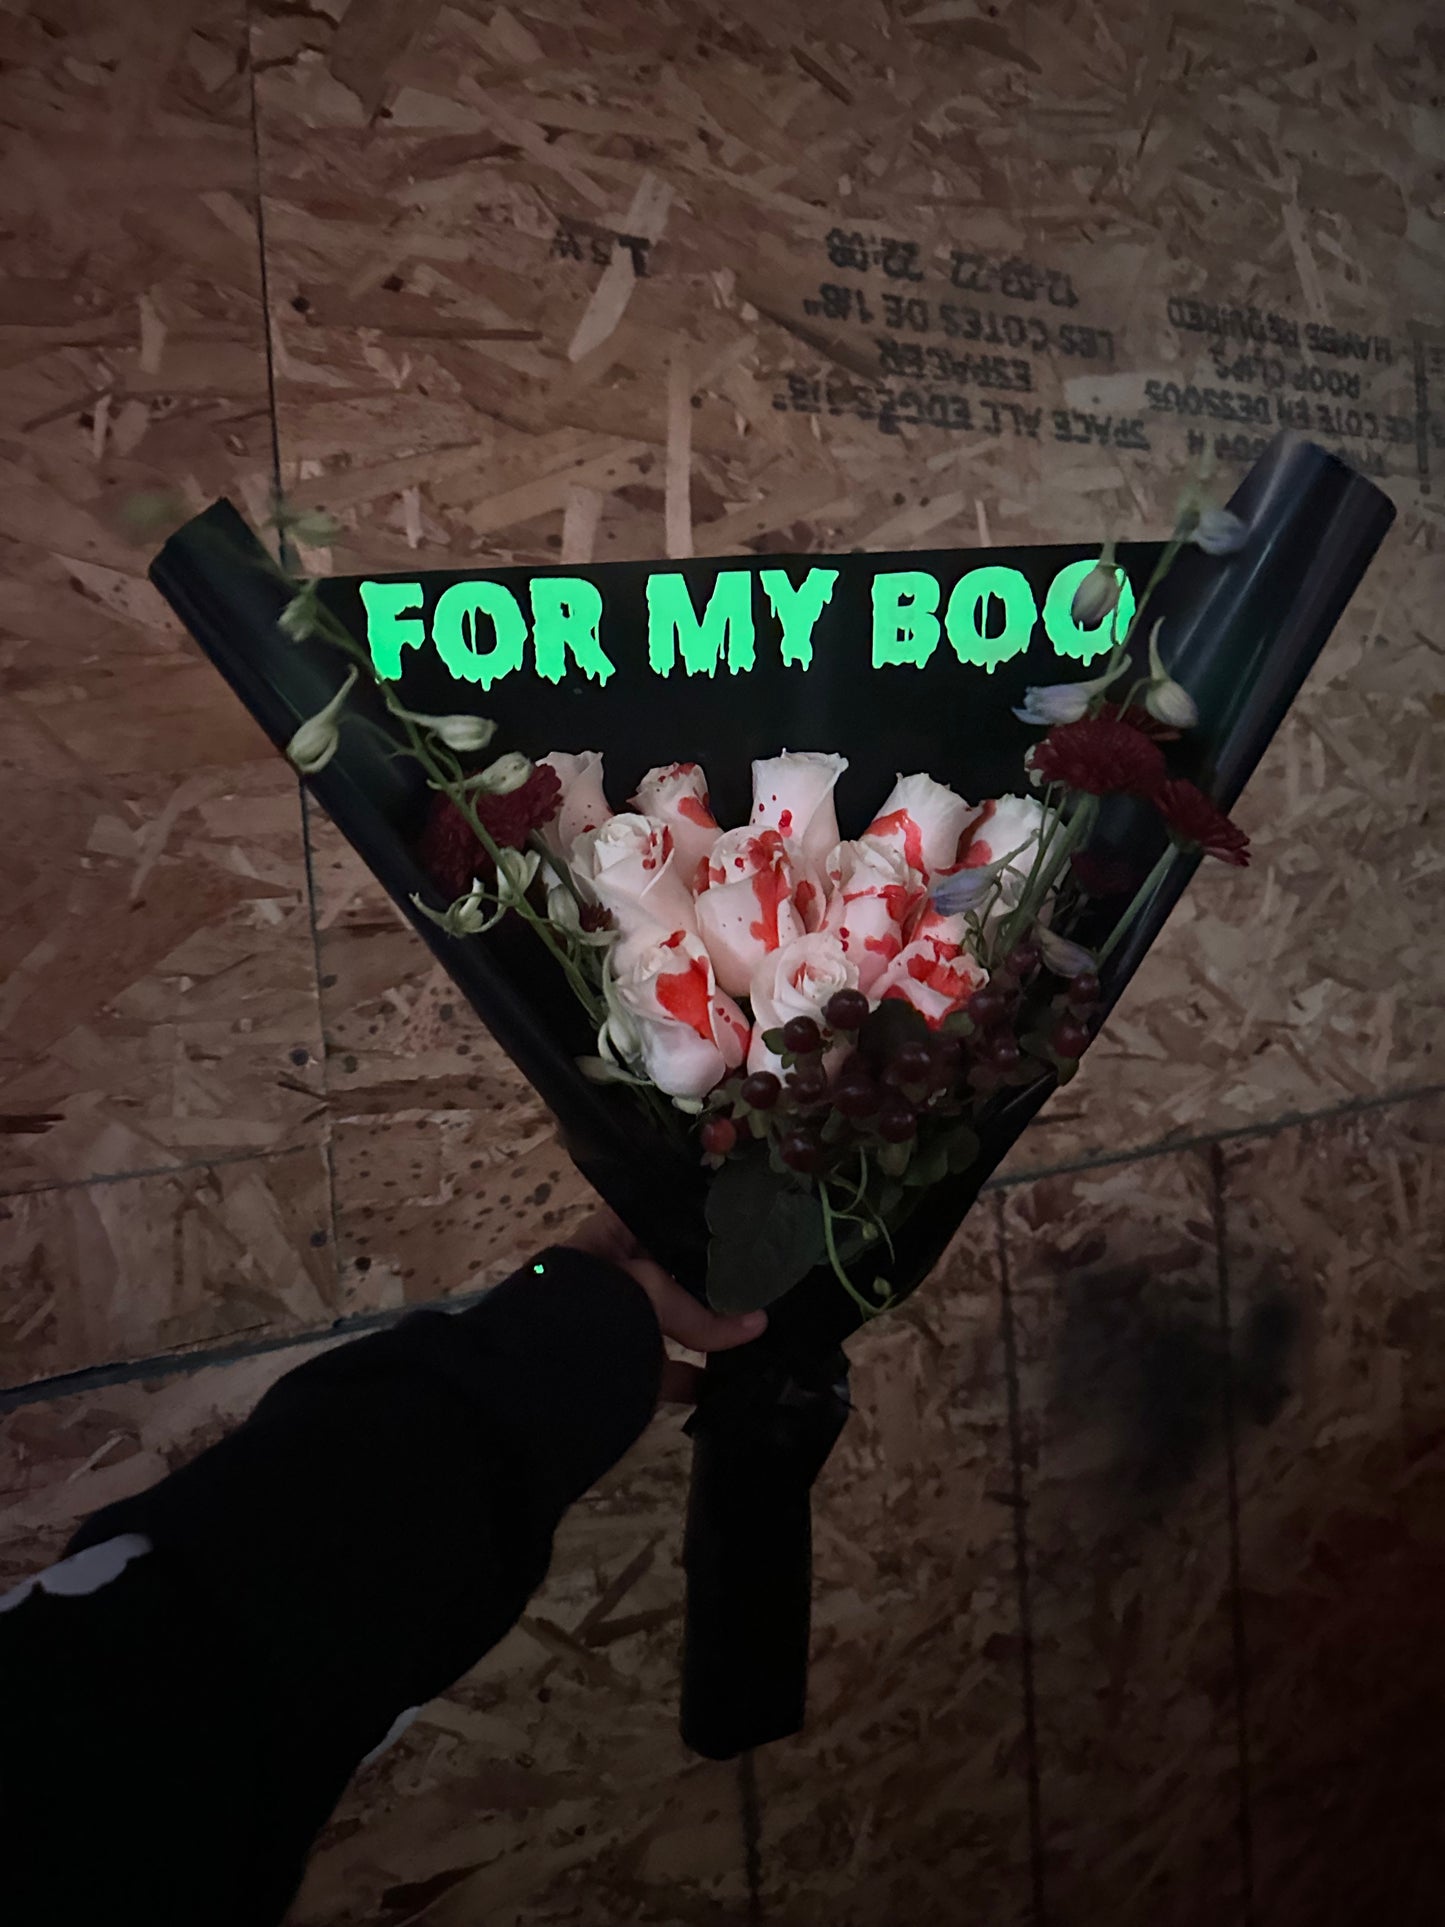 Glow “For My Boo” Bouquet